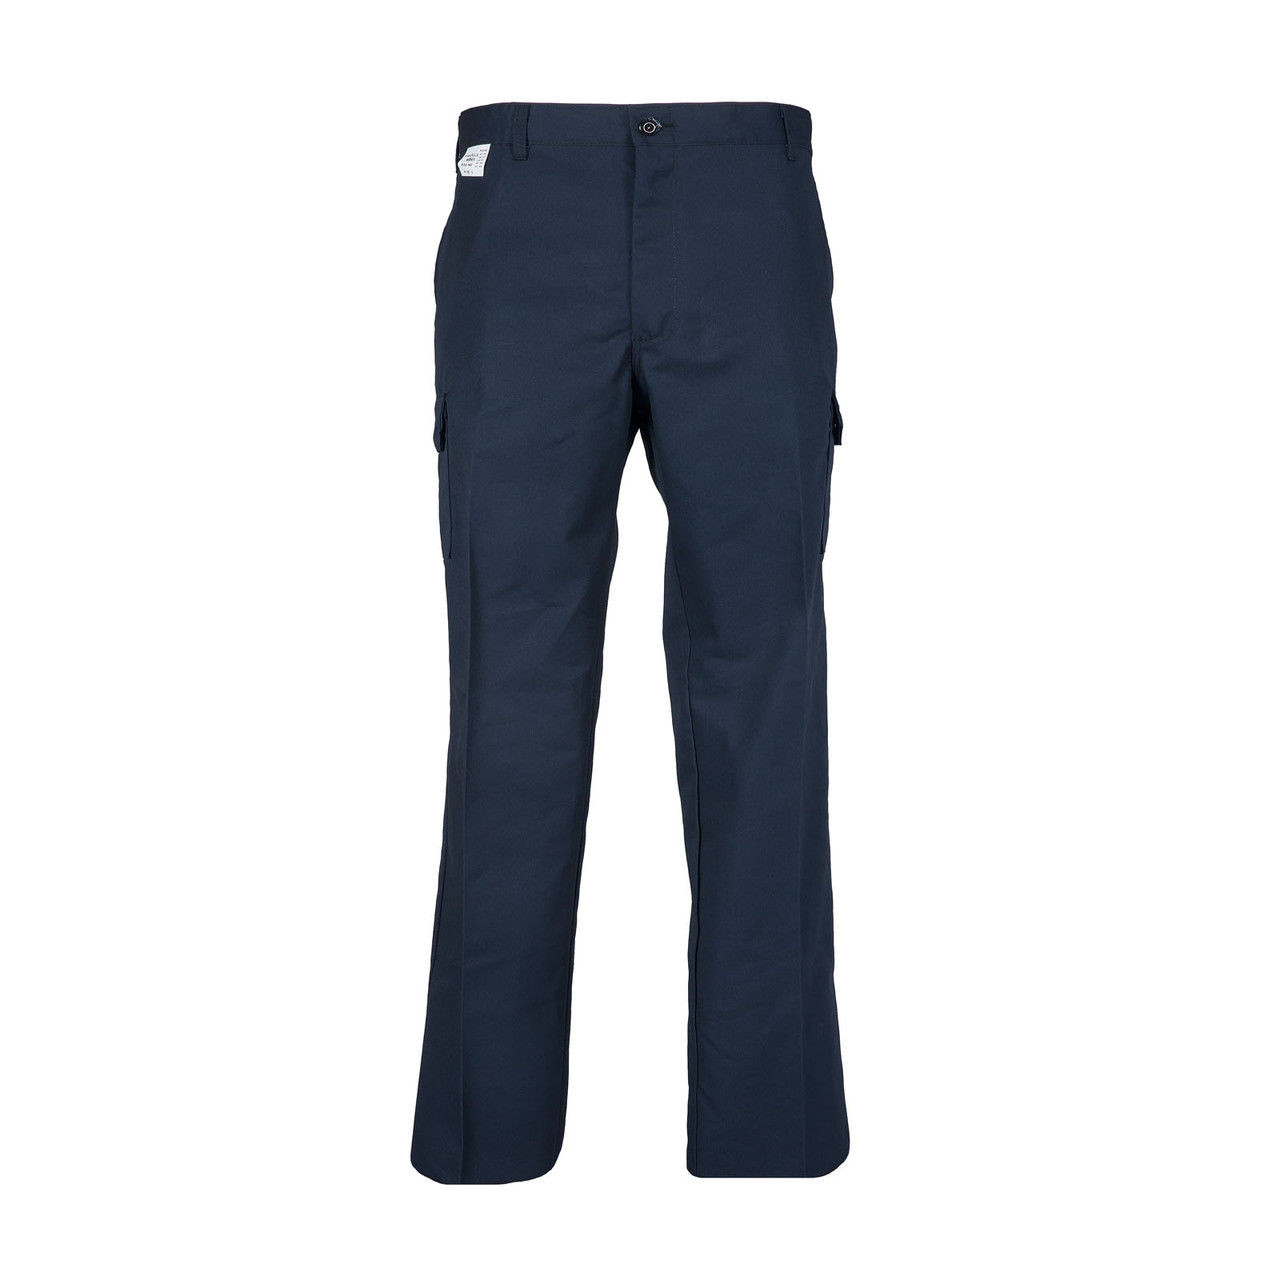 https://cdn11.bigcommerce.com/s-zd141b7qtp/images/stencil/1280x1280/products/46180/150408/p24nv-mens-cargo-industrial-work-pant-navy-blue-pinnacle-textile-industries__13170.1706021940.jpg?c=1